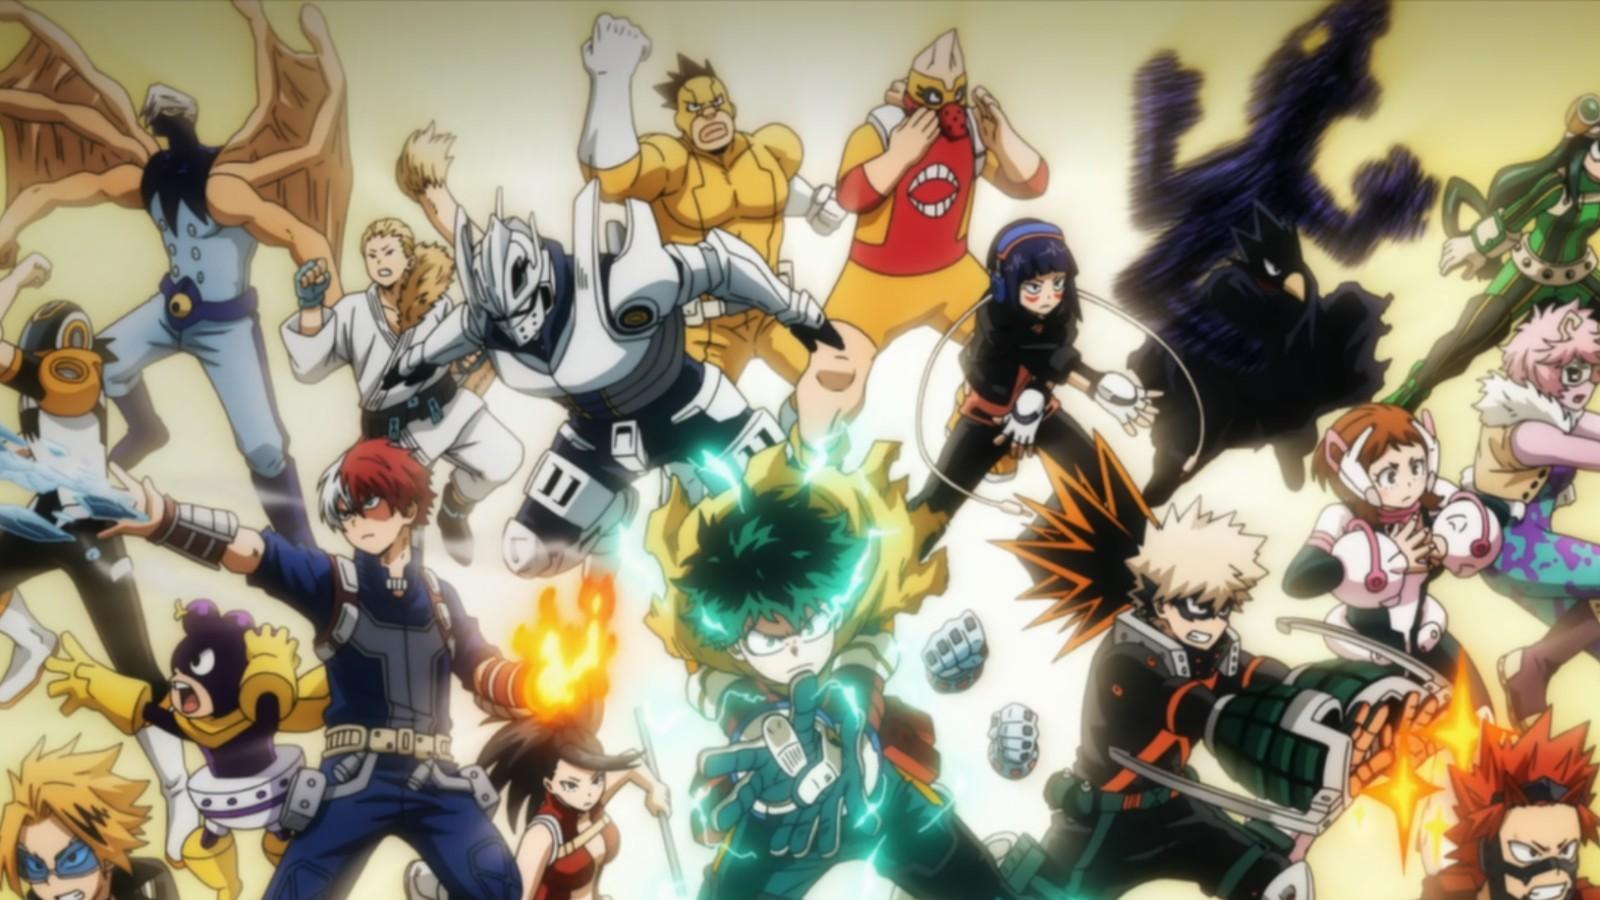 Class 1-A in My Hero Academia